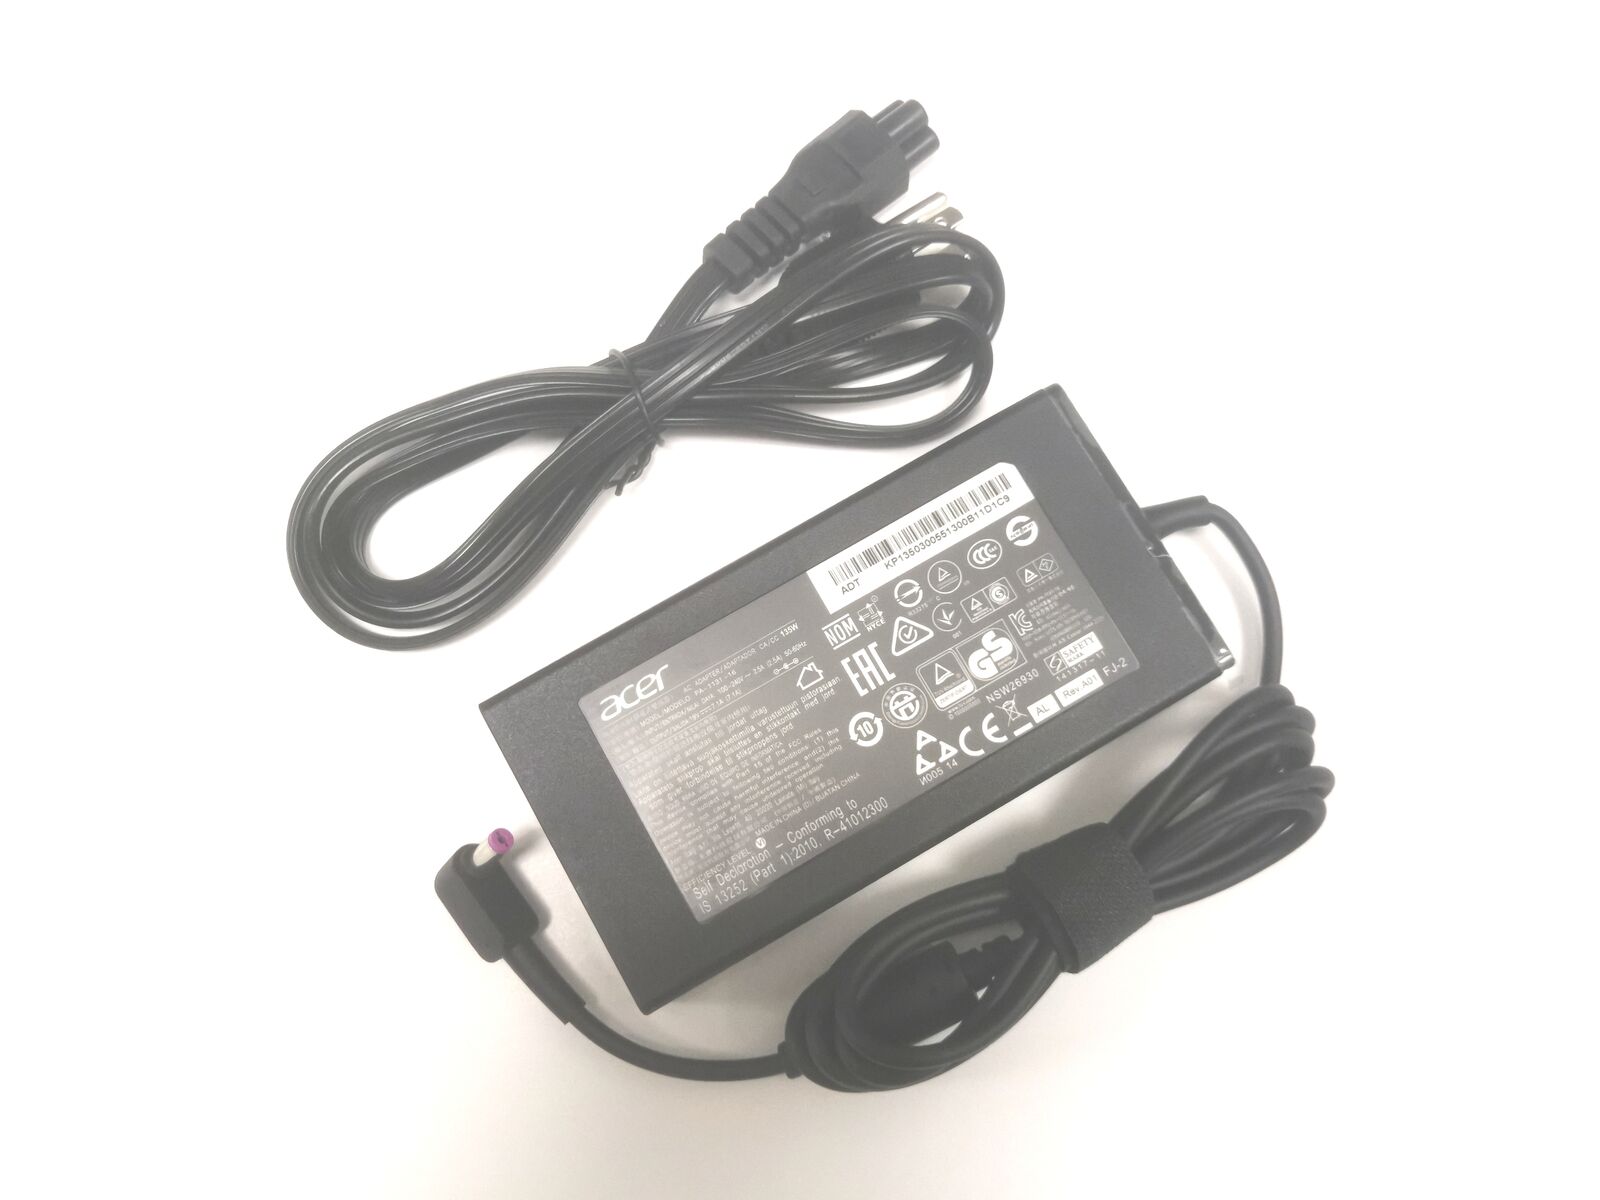 Genuine Acer 135W AC Adapter For Acer Nitro 5 AN515-54-51M5 Laptop w/P.Cord